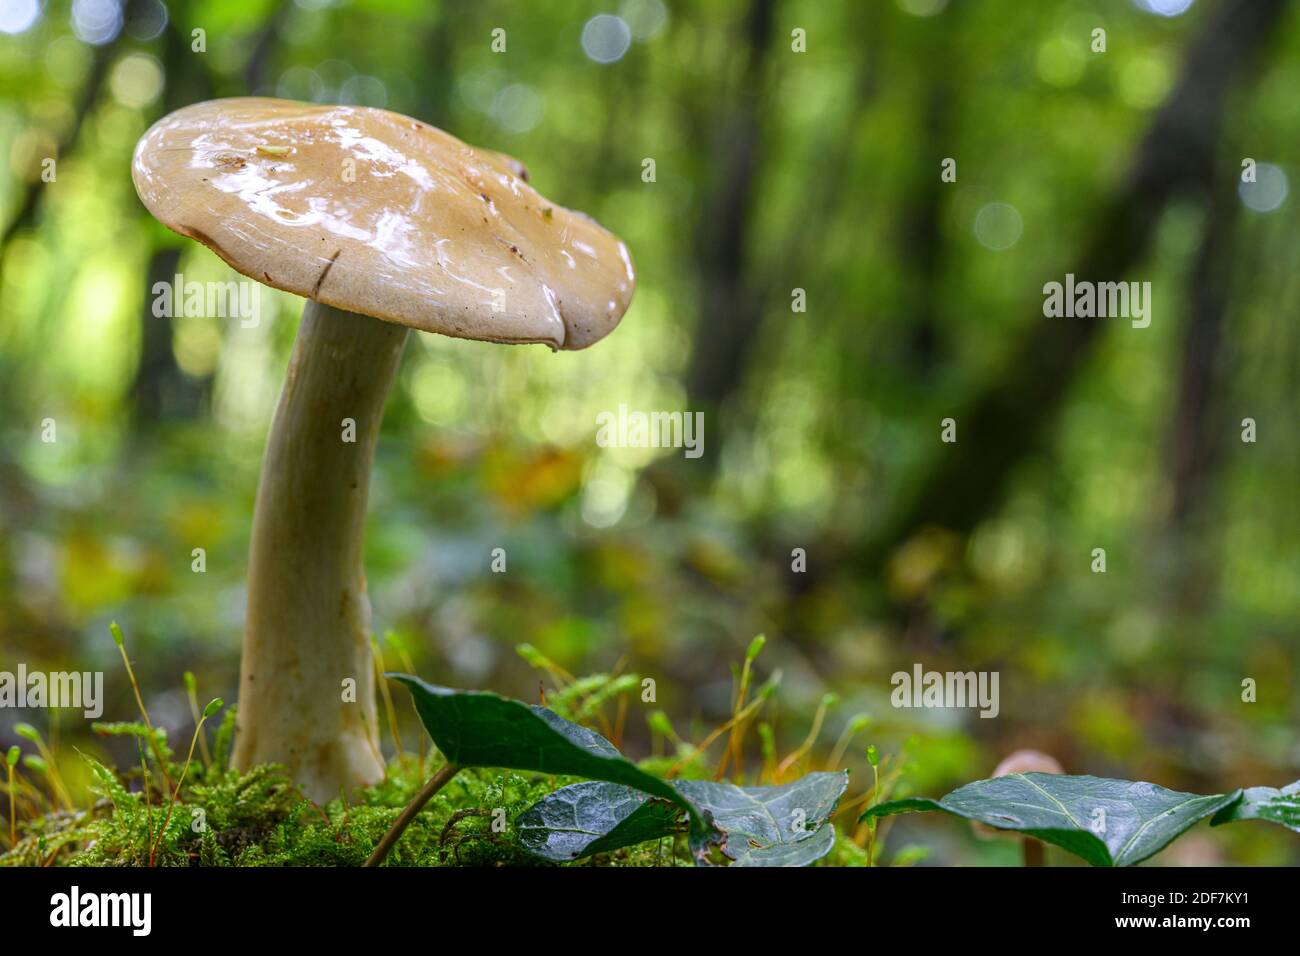 France, Somme (80), Cr?cy-en-Ponthieu, Cr?cy forest, Mushroom,Cortinarius sp. Stock Photo